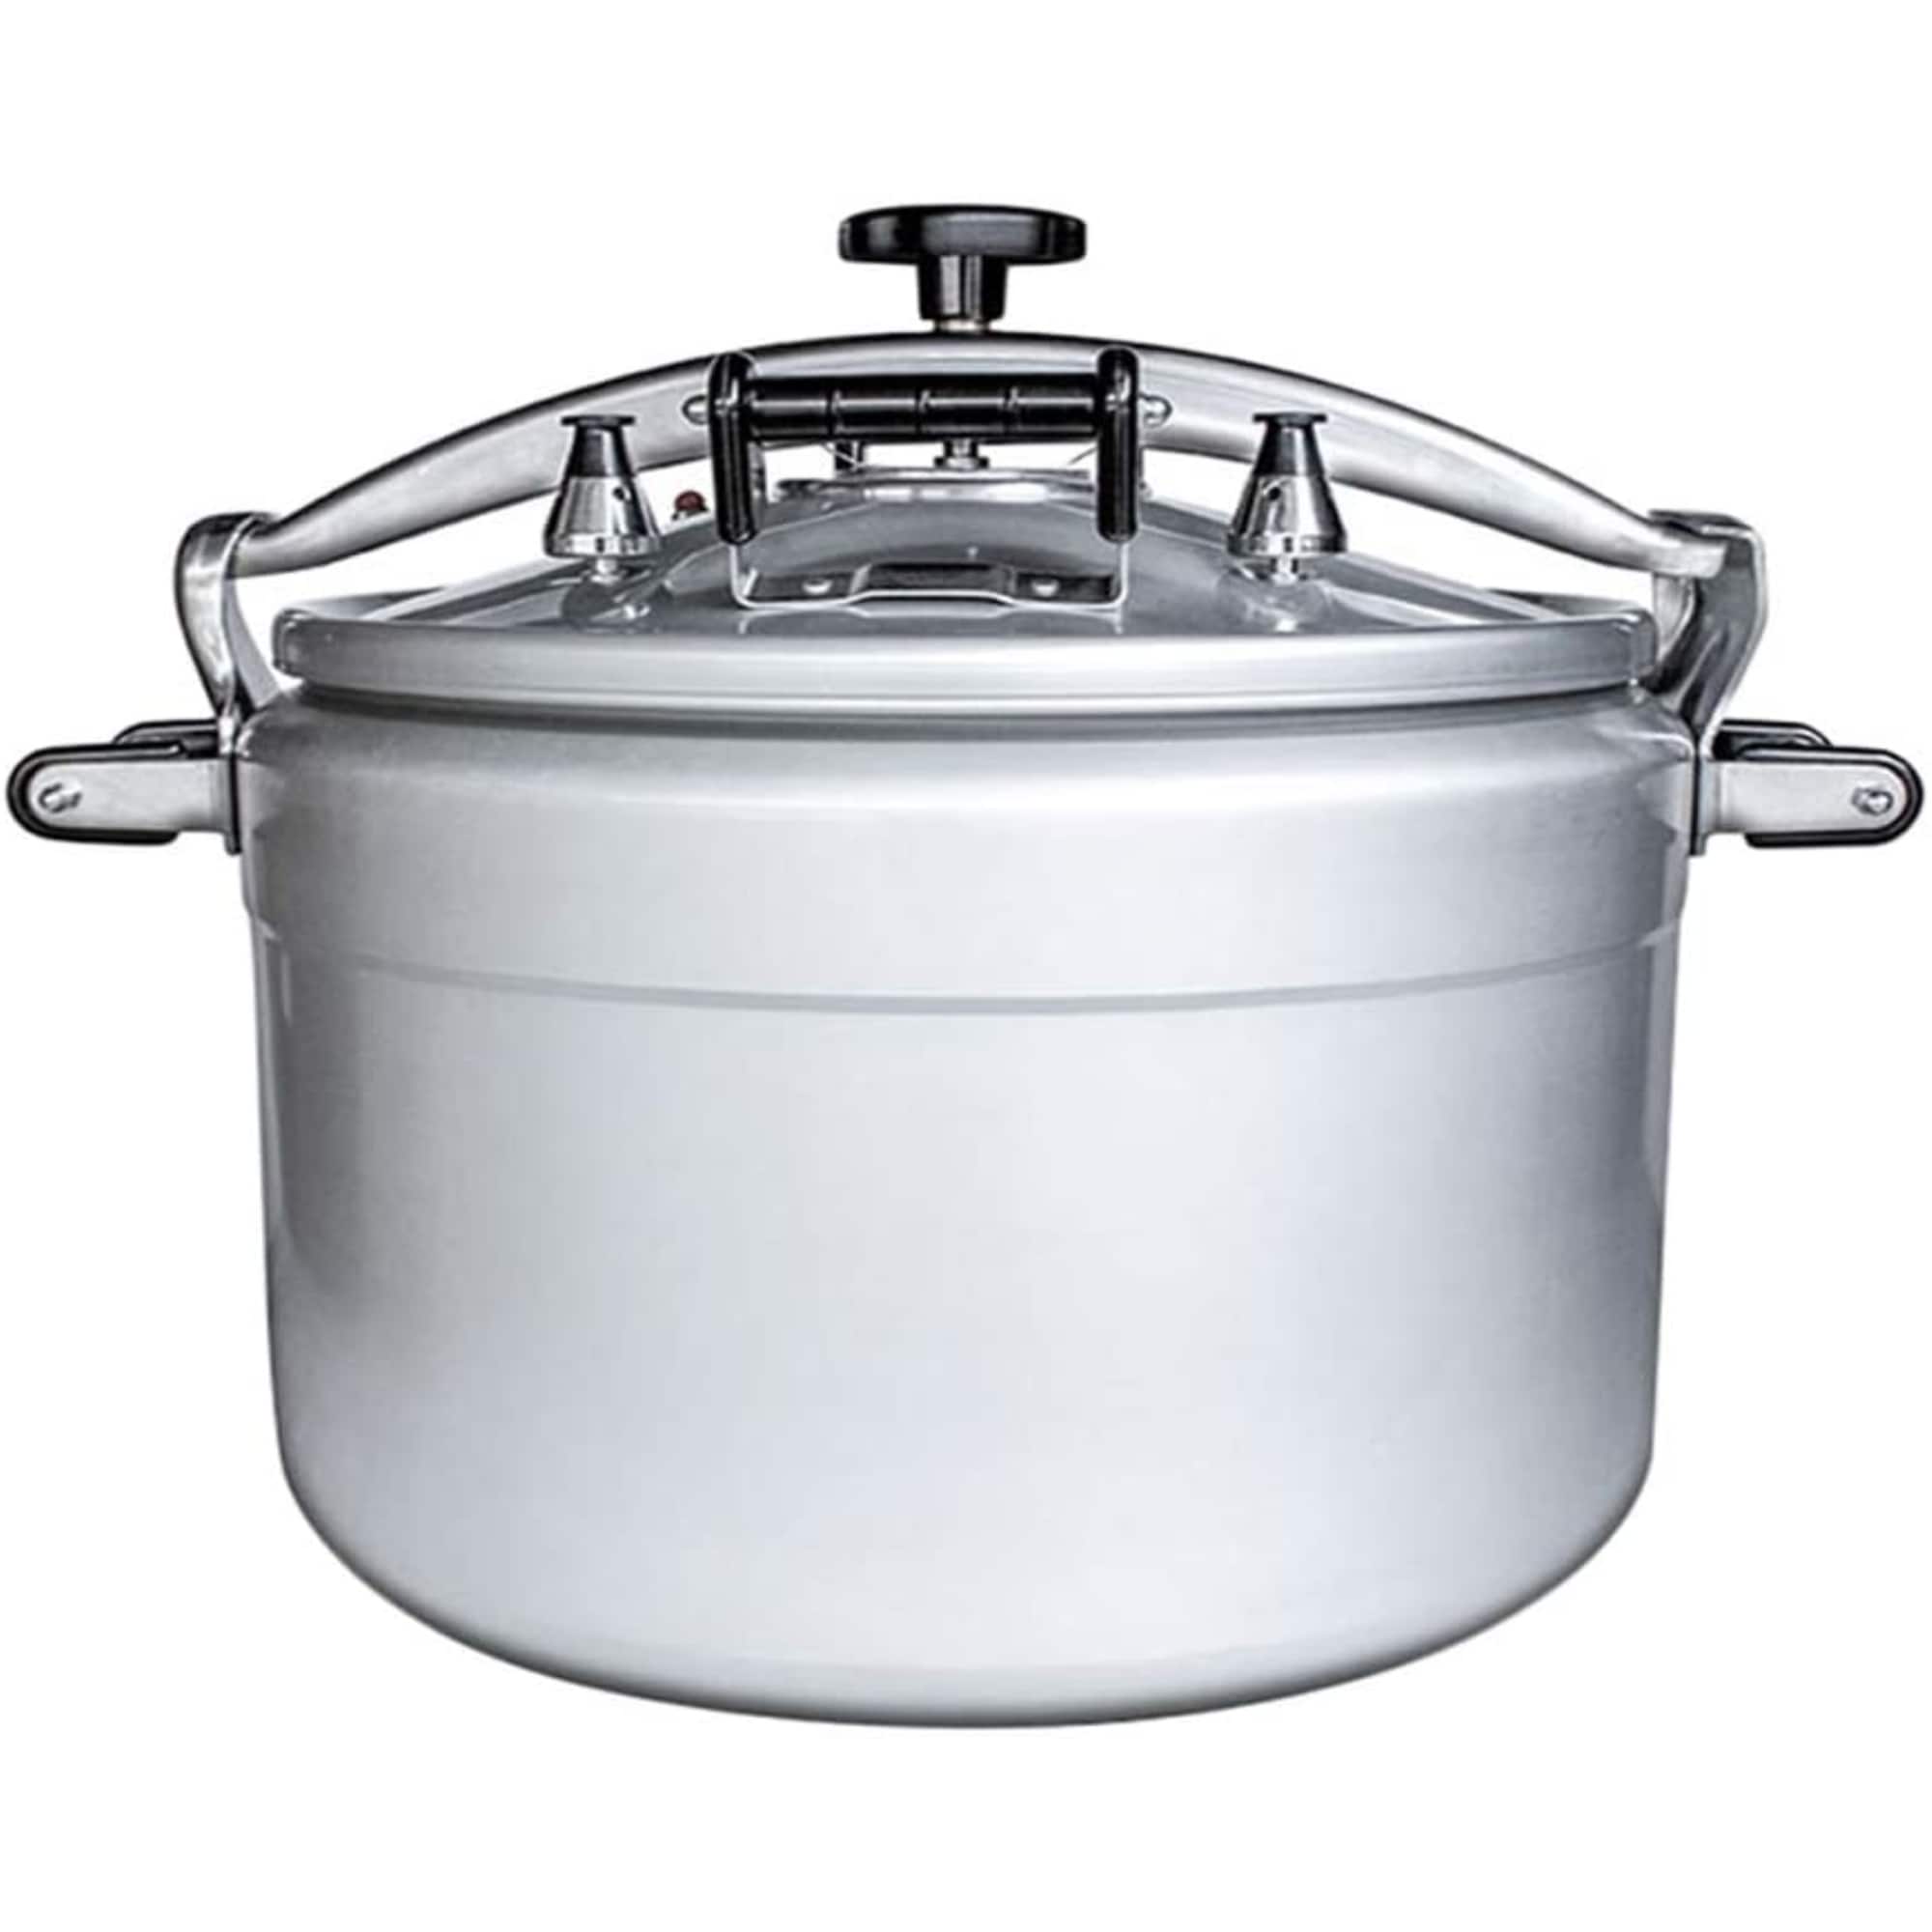 https://ak1.ostkcdn.com/images/products/is/images/direct/61bd1f4fec8a5a97978cfd86f6a3779ebda273f4/Pressure-Cooker-Large-Capacity-Extra-Large-Gas-Large-Restaurant-Aluminum-Alloy-Pressure-Cooker-Explosion-proof-50L.jpg